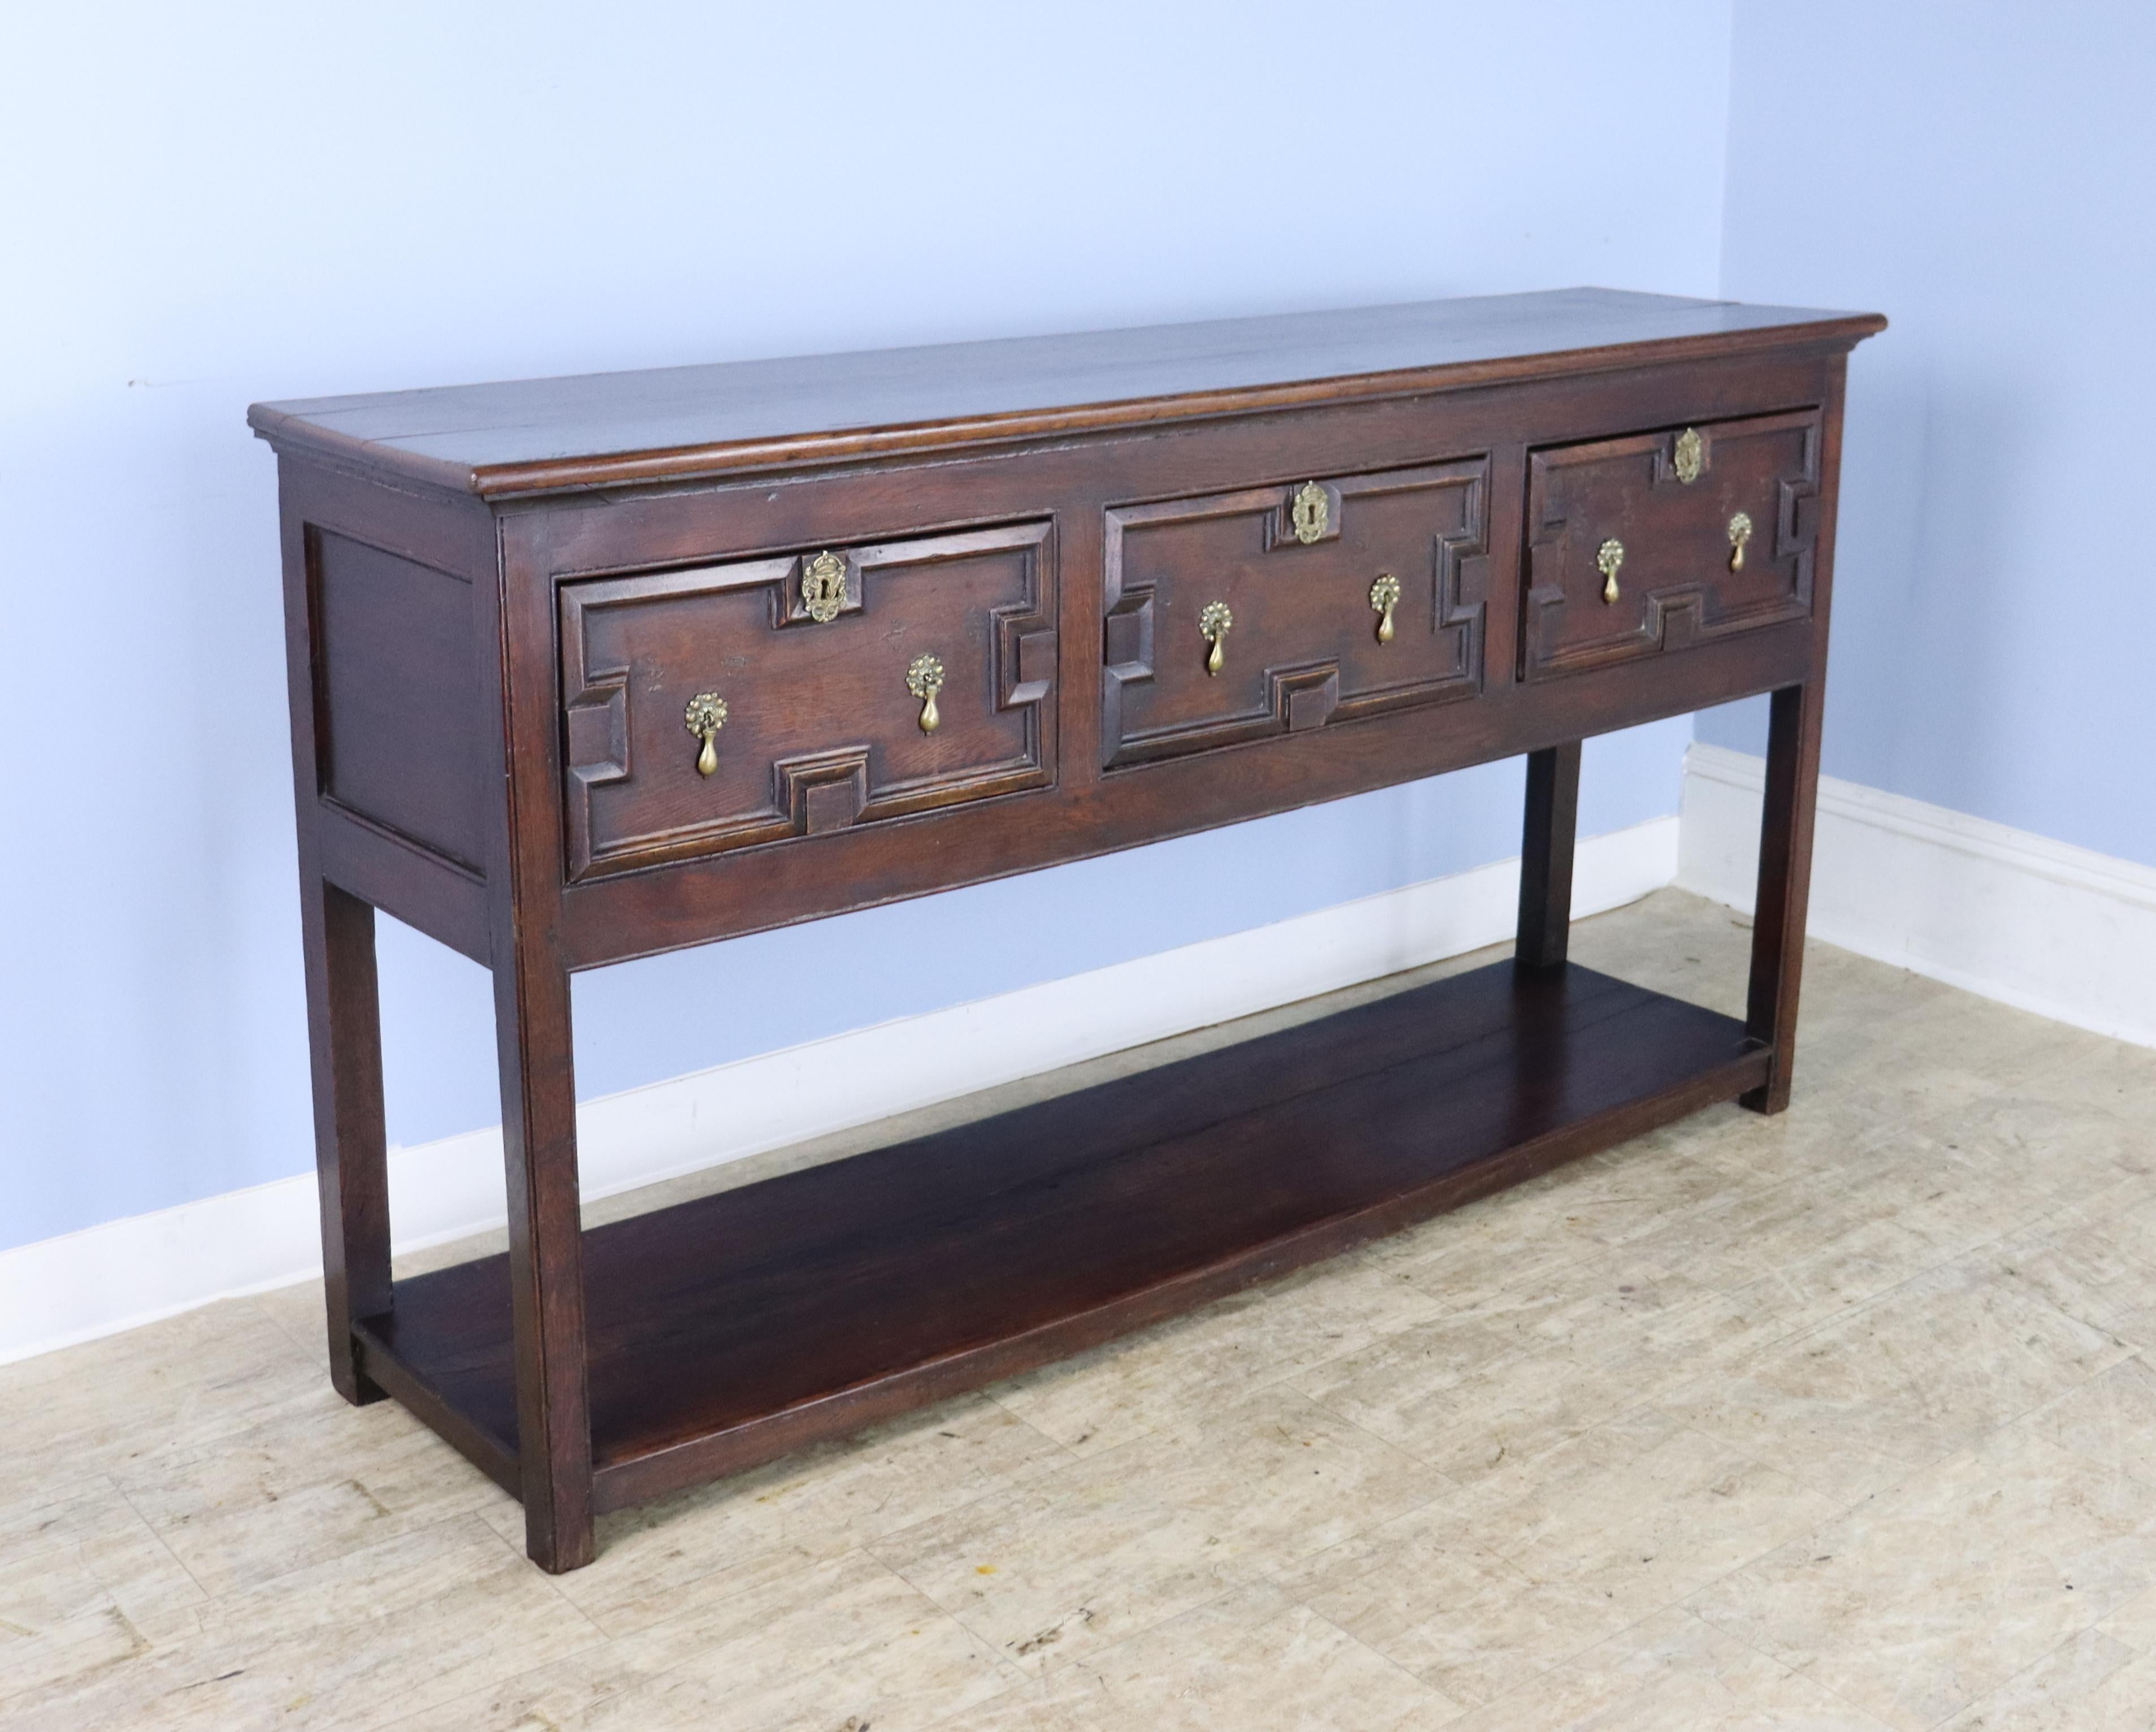 A handsome early dark oak server from the British Jacobean period.  Potbord base with fielded, or carved inset panels on the three drawers, typical of the period.  Original brass teardrop eschutcheons.  The wood has good color and patina and the